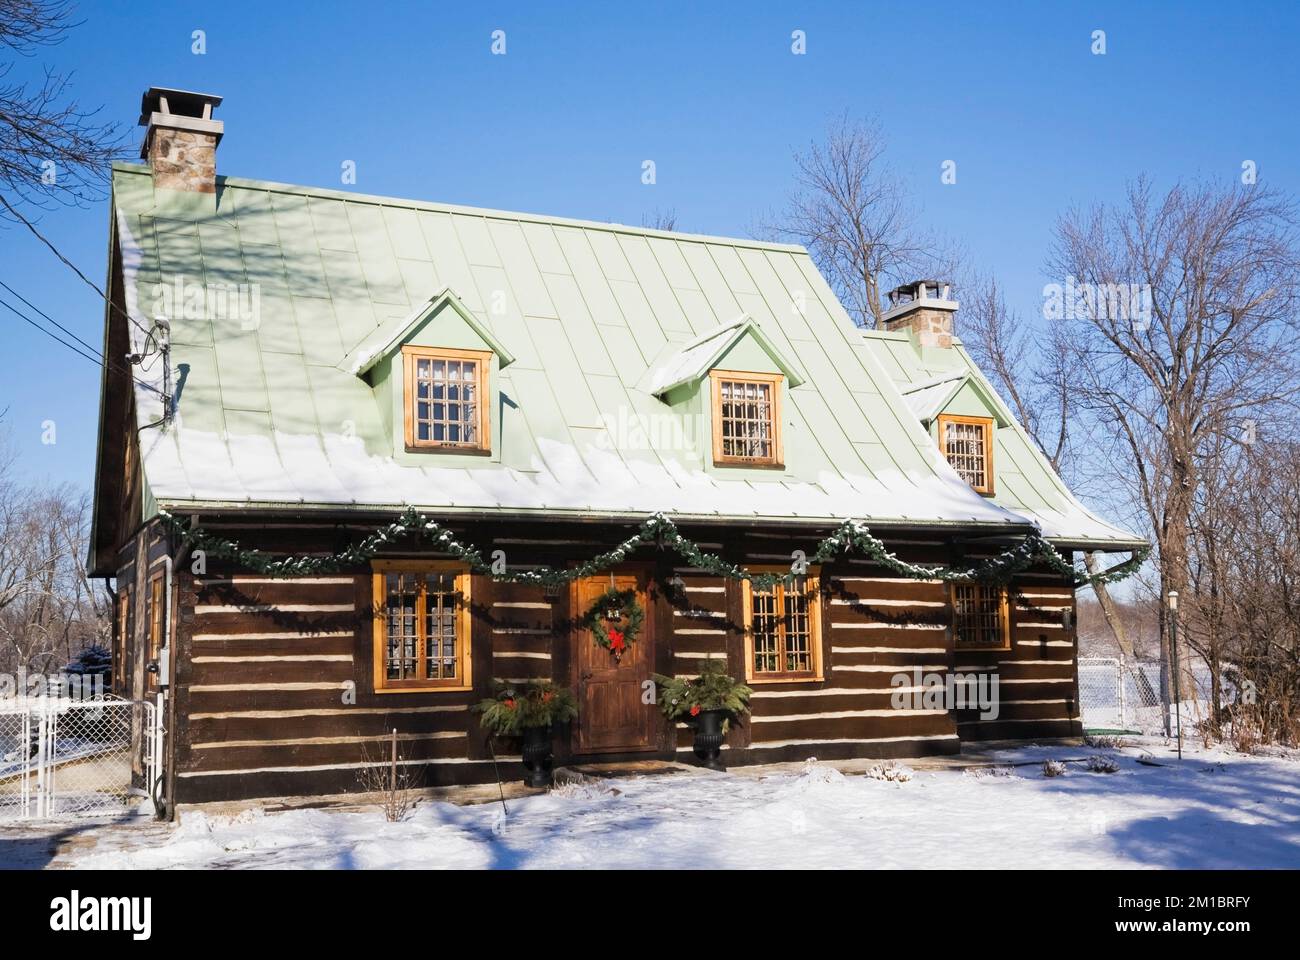 Old 1800s two story Canadiana cottage style log home with Christmas decorations in winter. Stock Photo